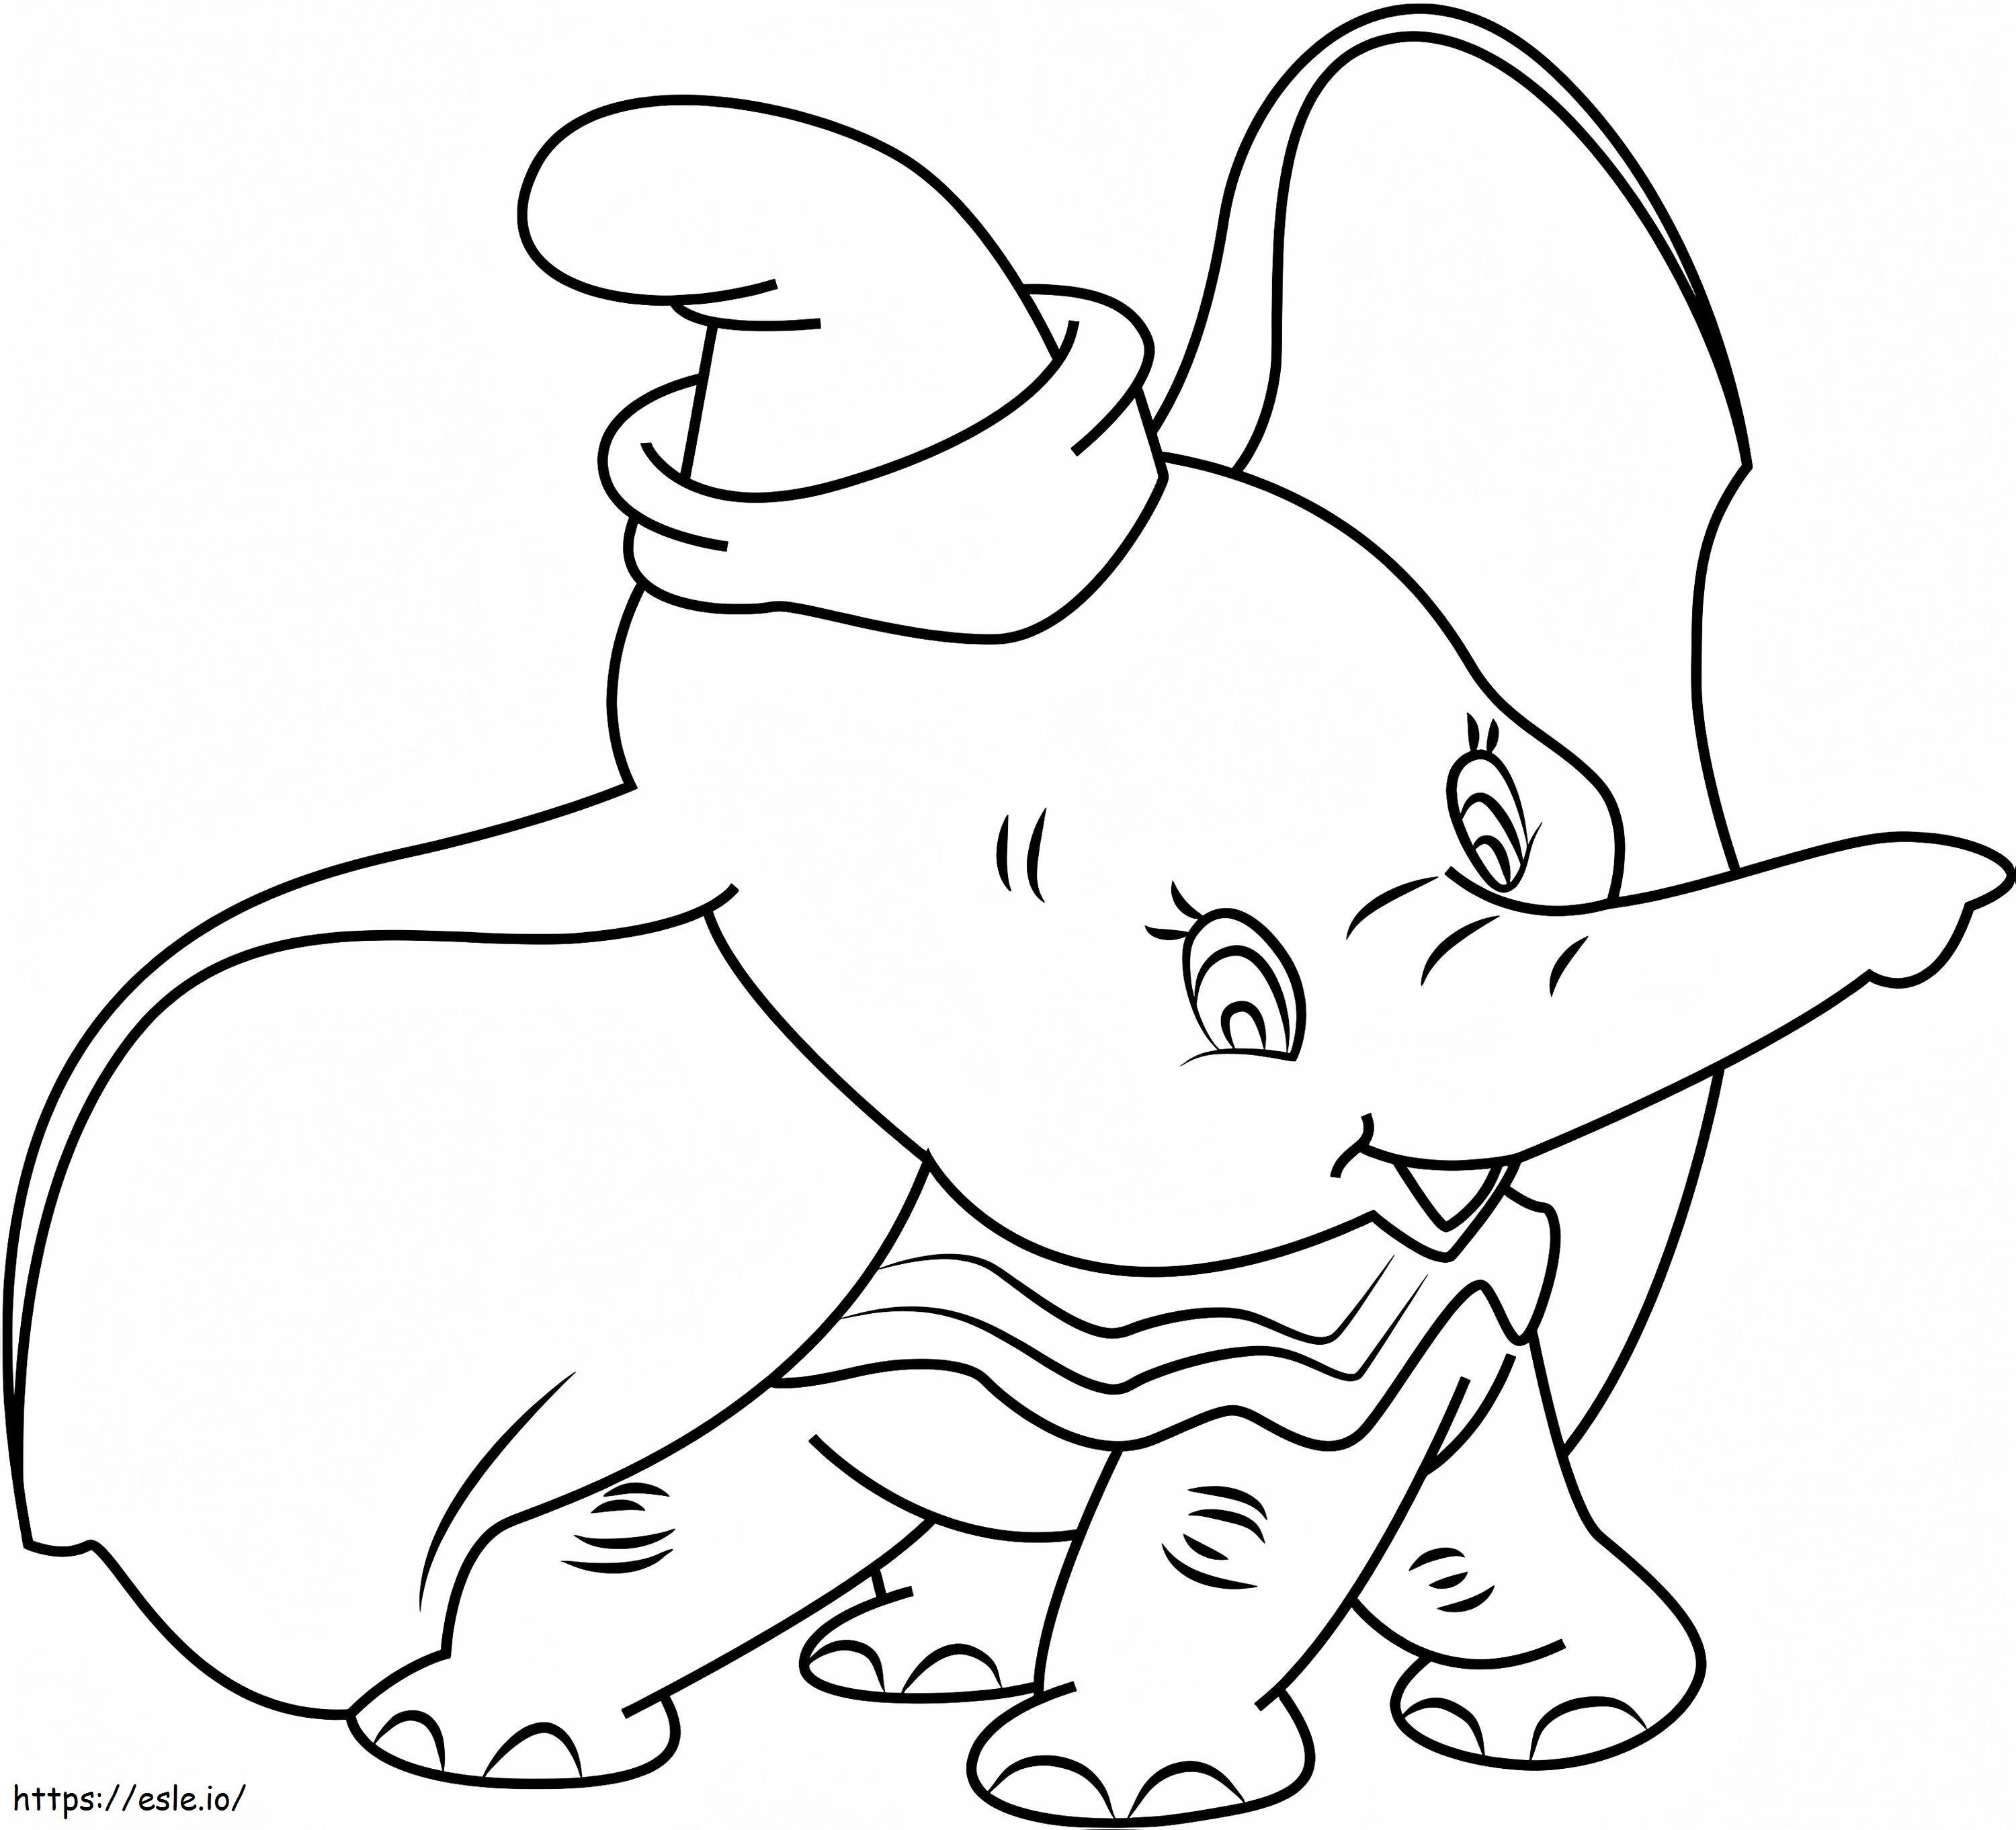 1530930677 Happy Dumbo A4 coloring page